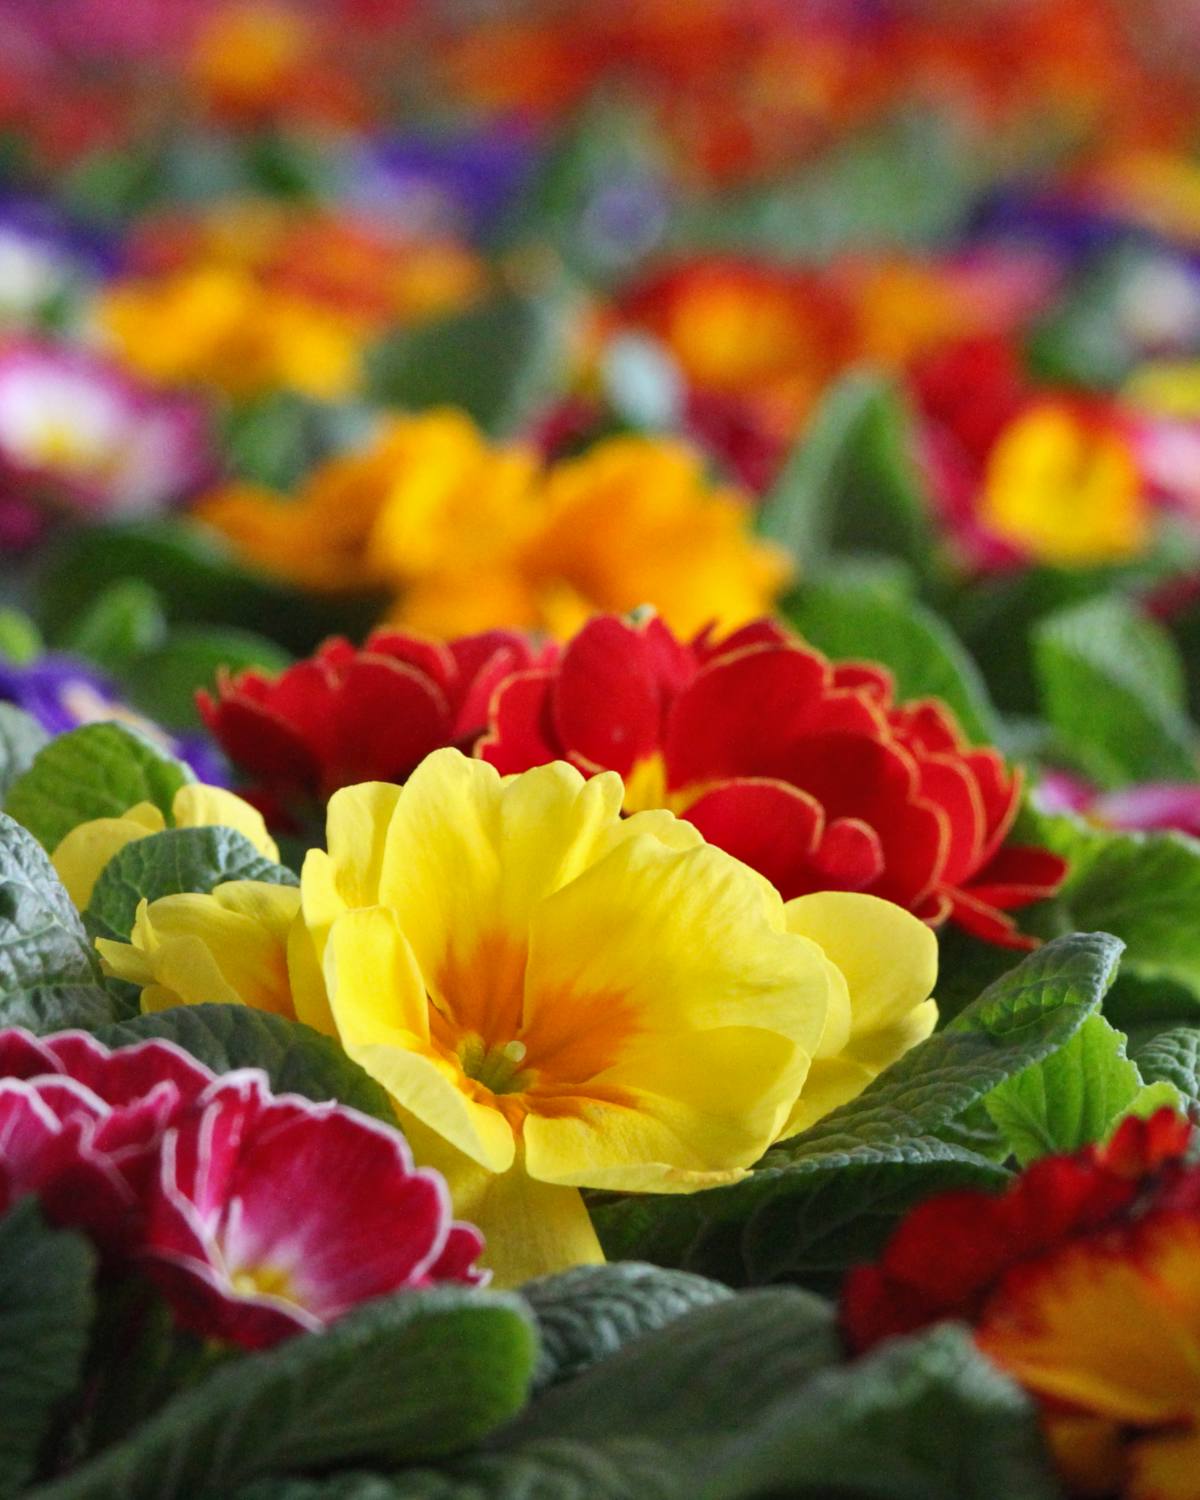 Endless view of bright-colored primroses with a yellow one in the forefront